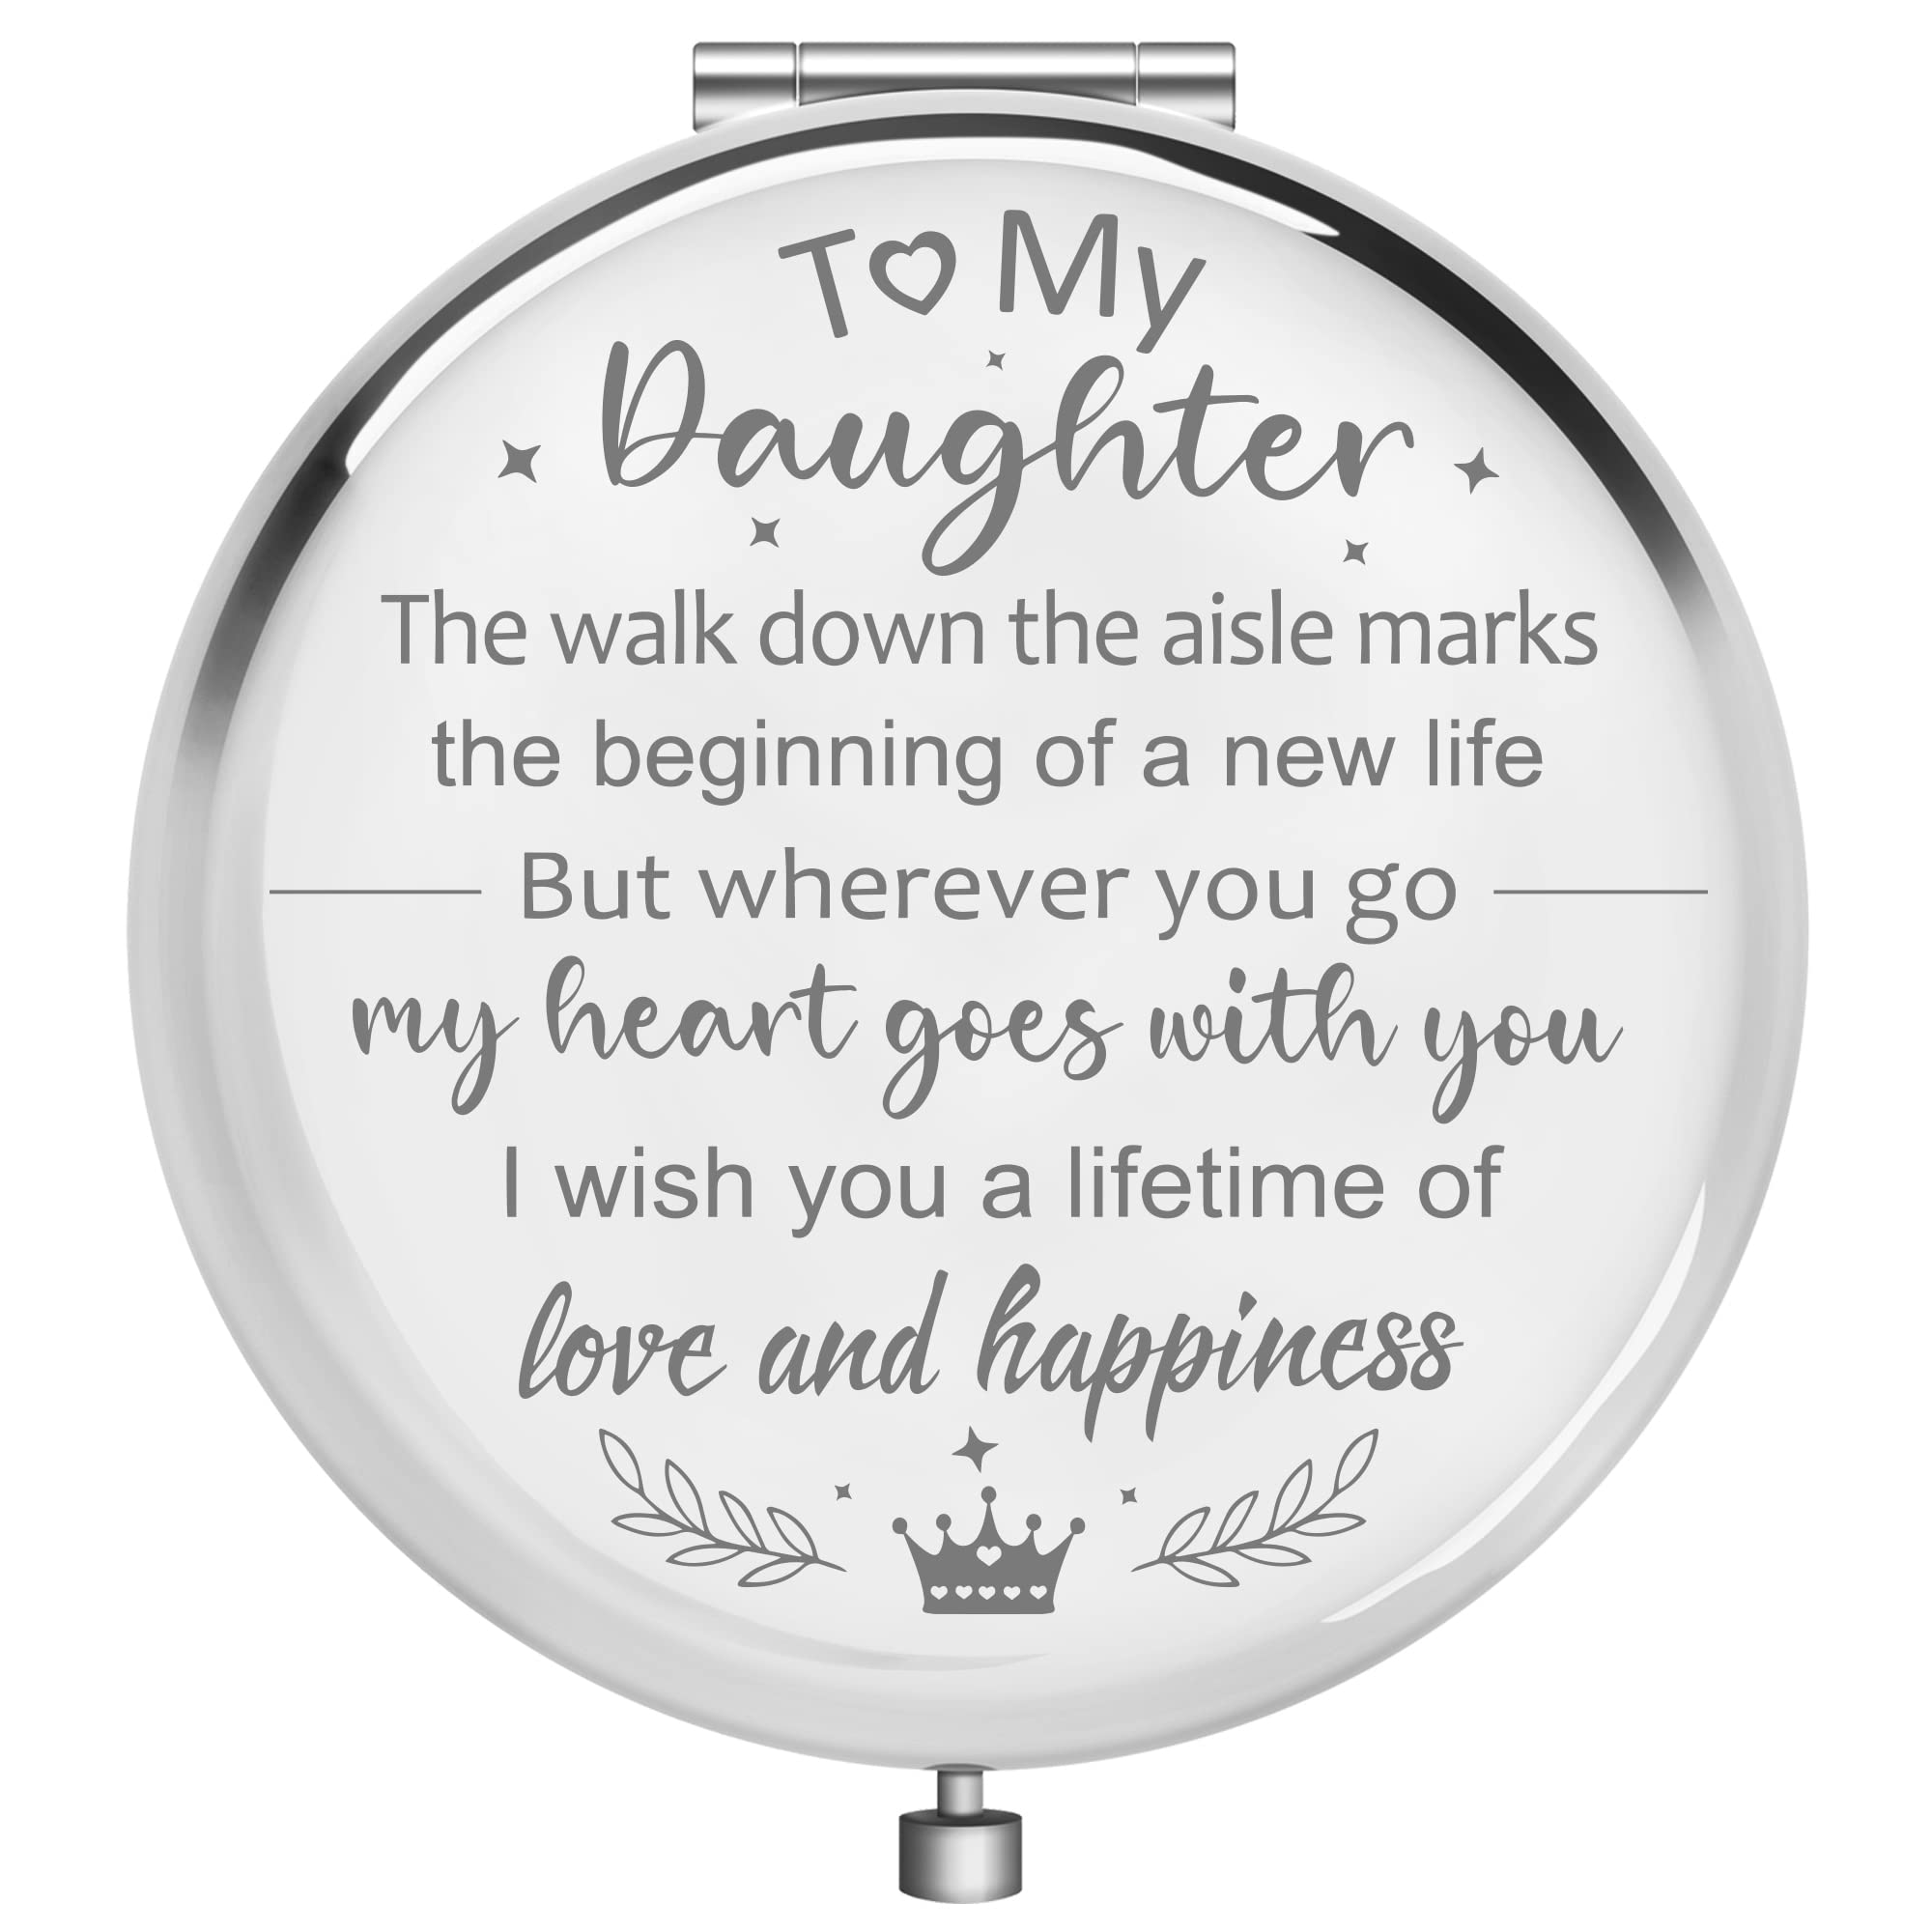 Hexagram Daughter Wedding Gift from Mom and Dad - Wedding Gifts for Bride  Compact Mirror - Gifts for Daughter Bride Gifts for Wedding Day Daughter  Wedding 2.7L X 2.6W